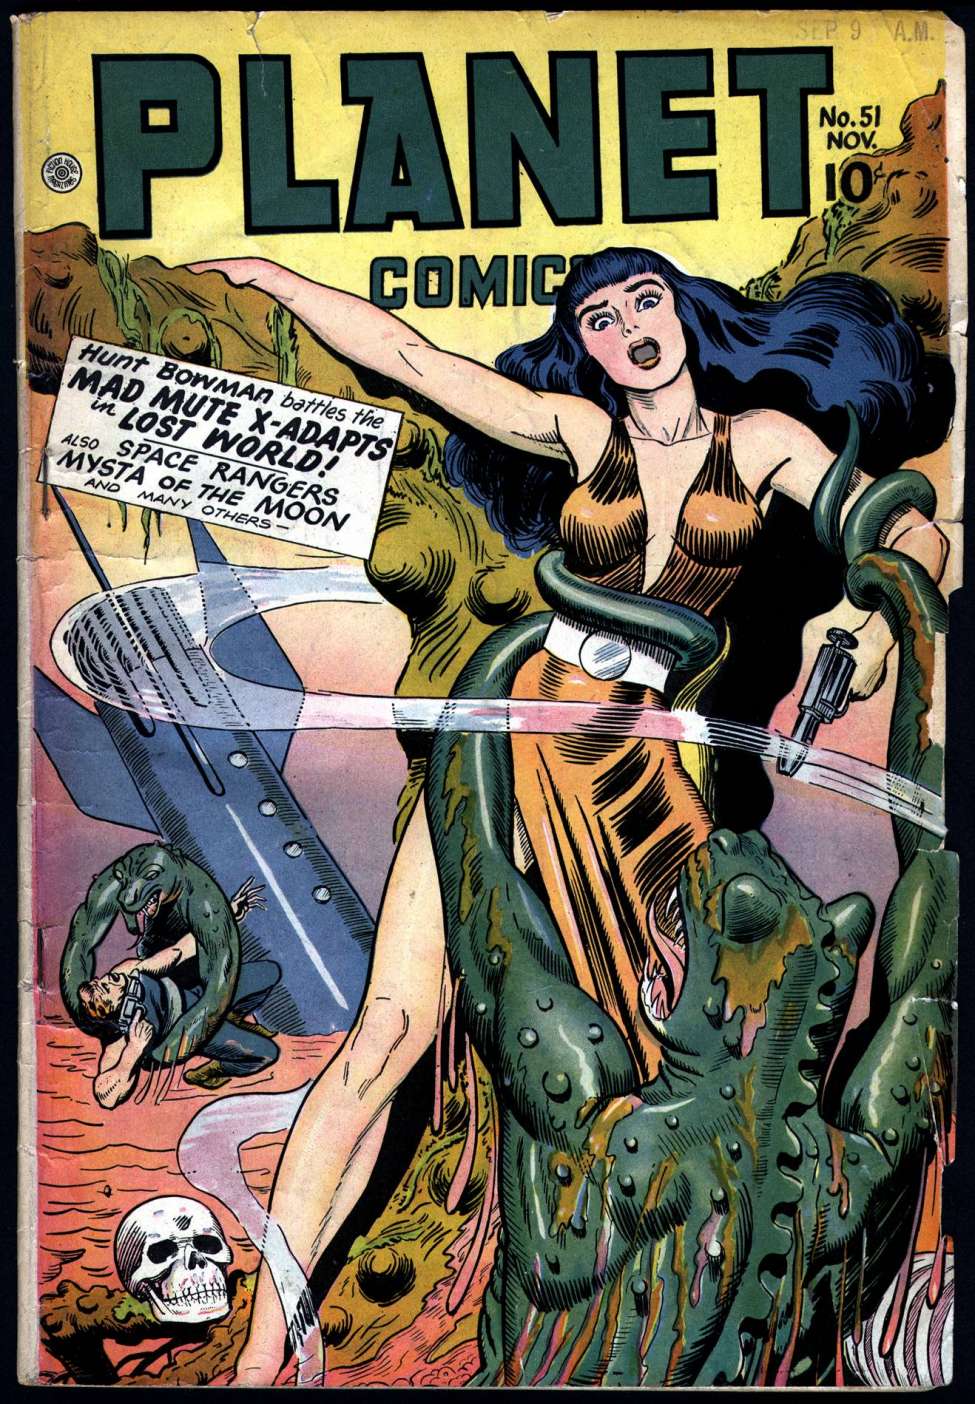 Comic Book Cover For Planet Comics 51 - Version 1